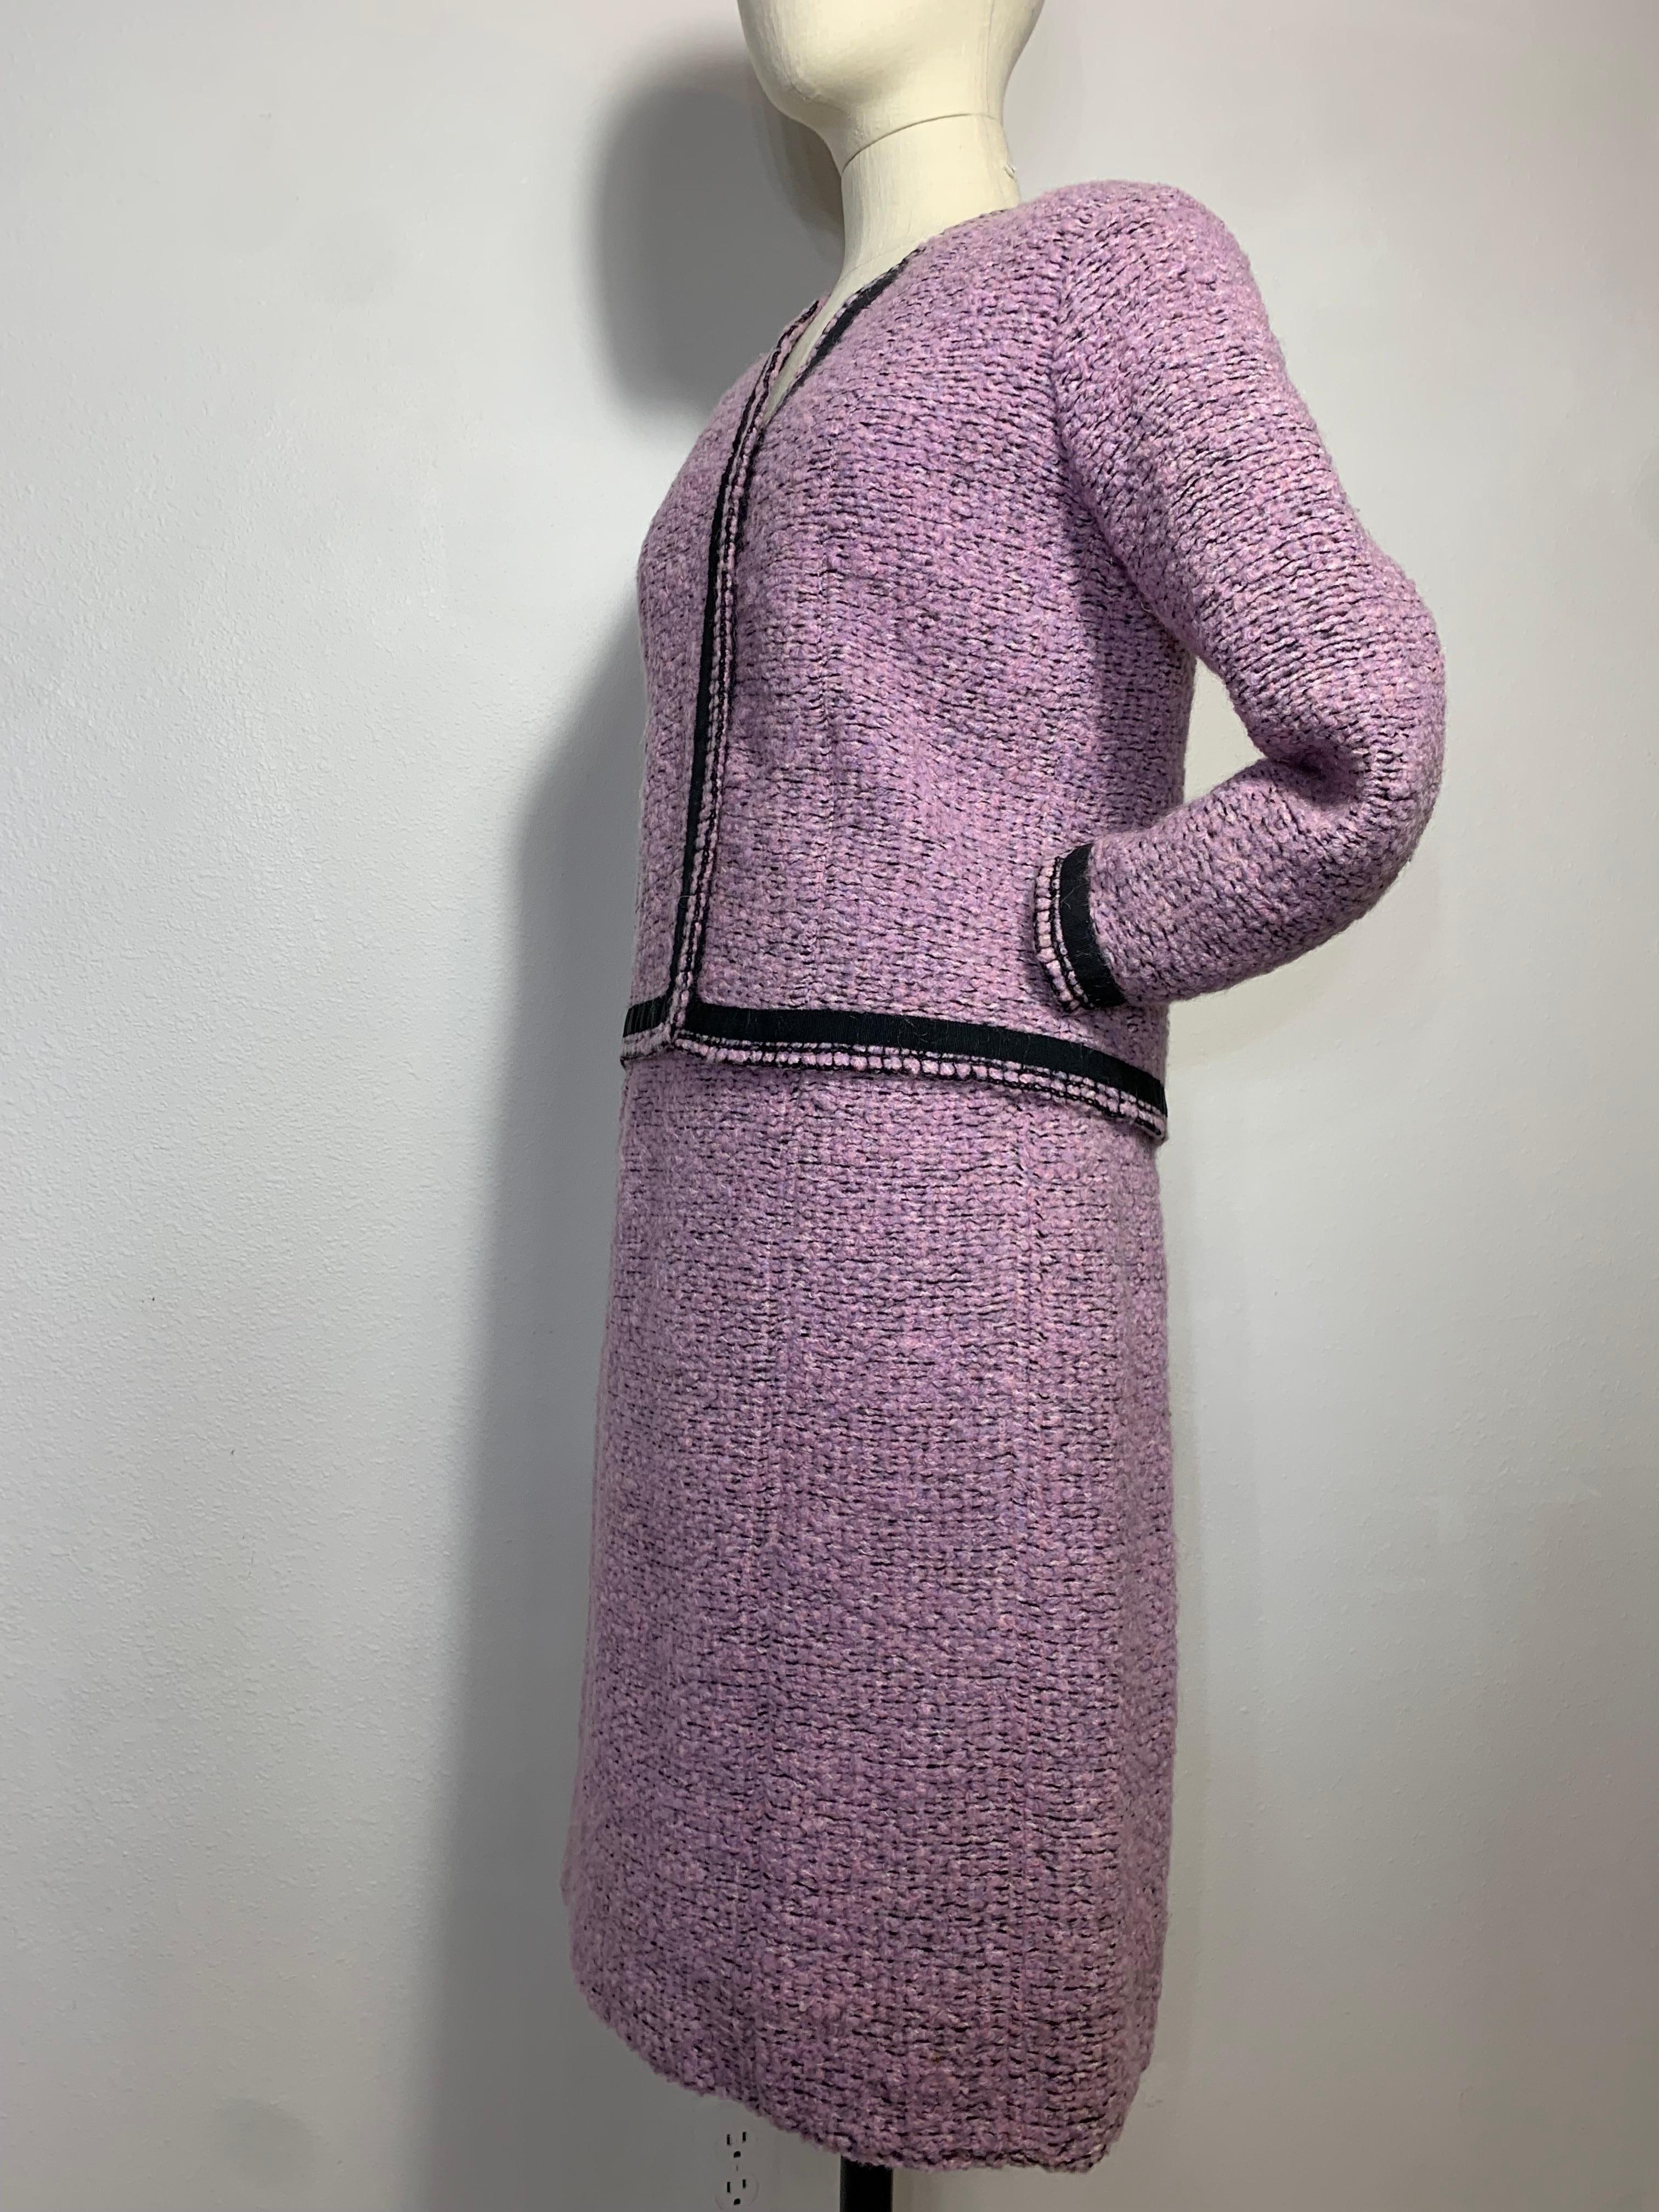 1960 Autumn/Winter Chanel Haute Couture Documented Lavender Tweed Skirt Suit  For Sale 5